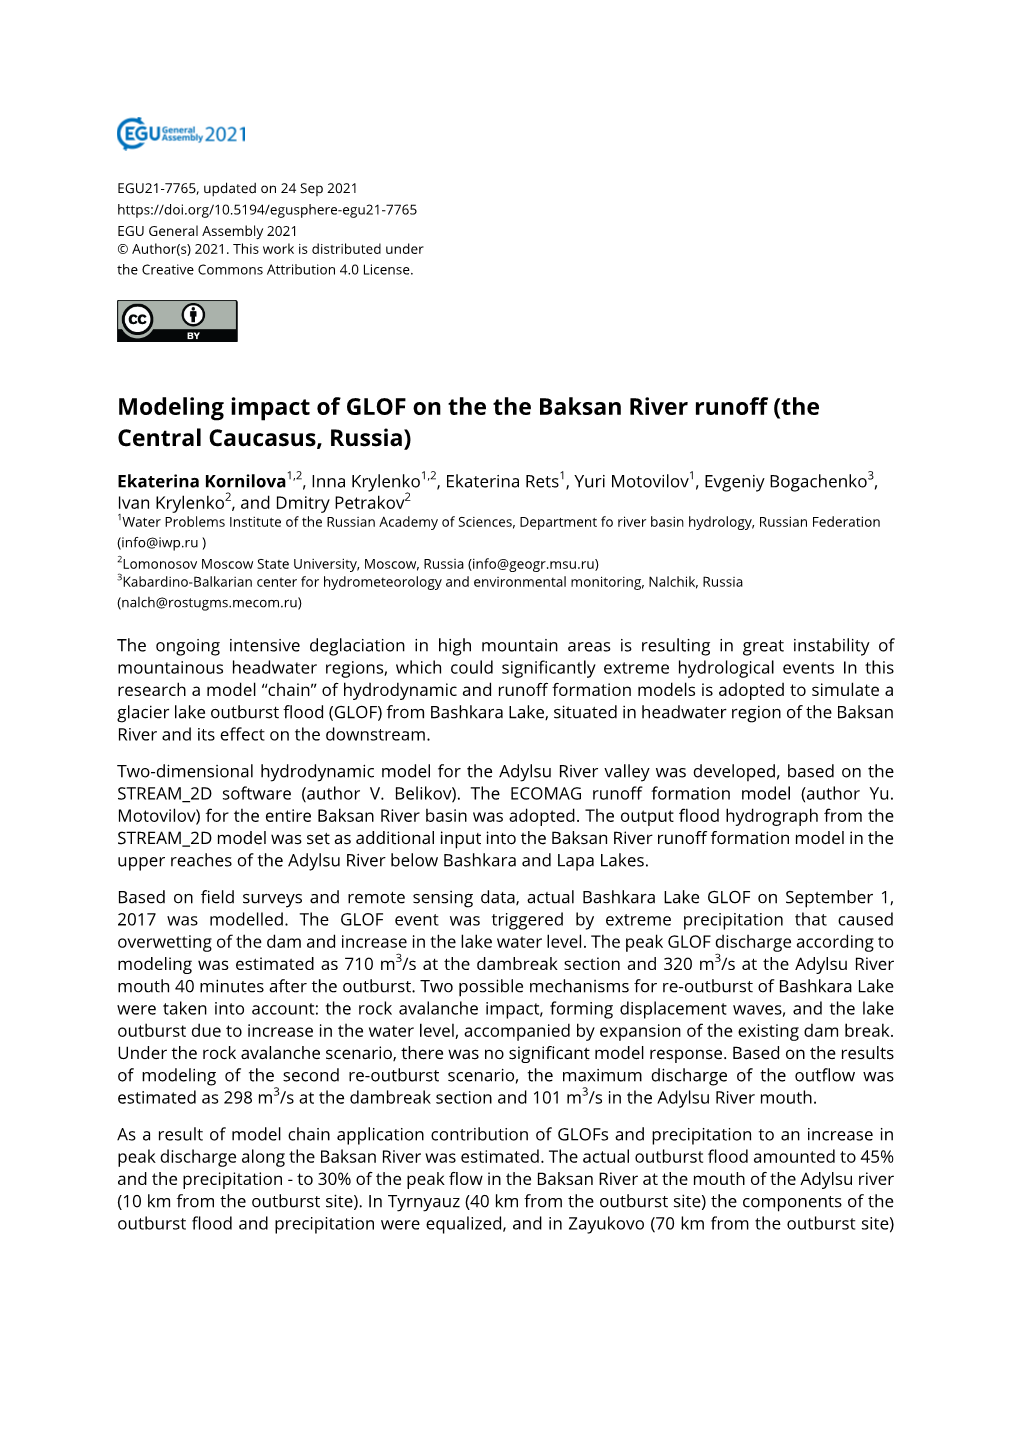 Modeling Impact of GLOF on the the Baksan River Runoff (The Central Caucasus, Russia)